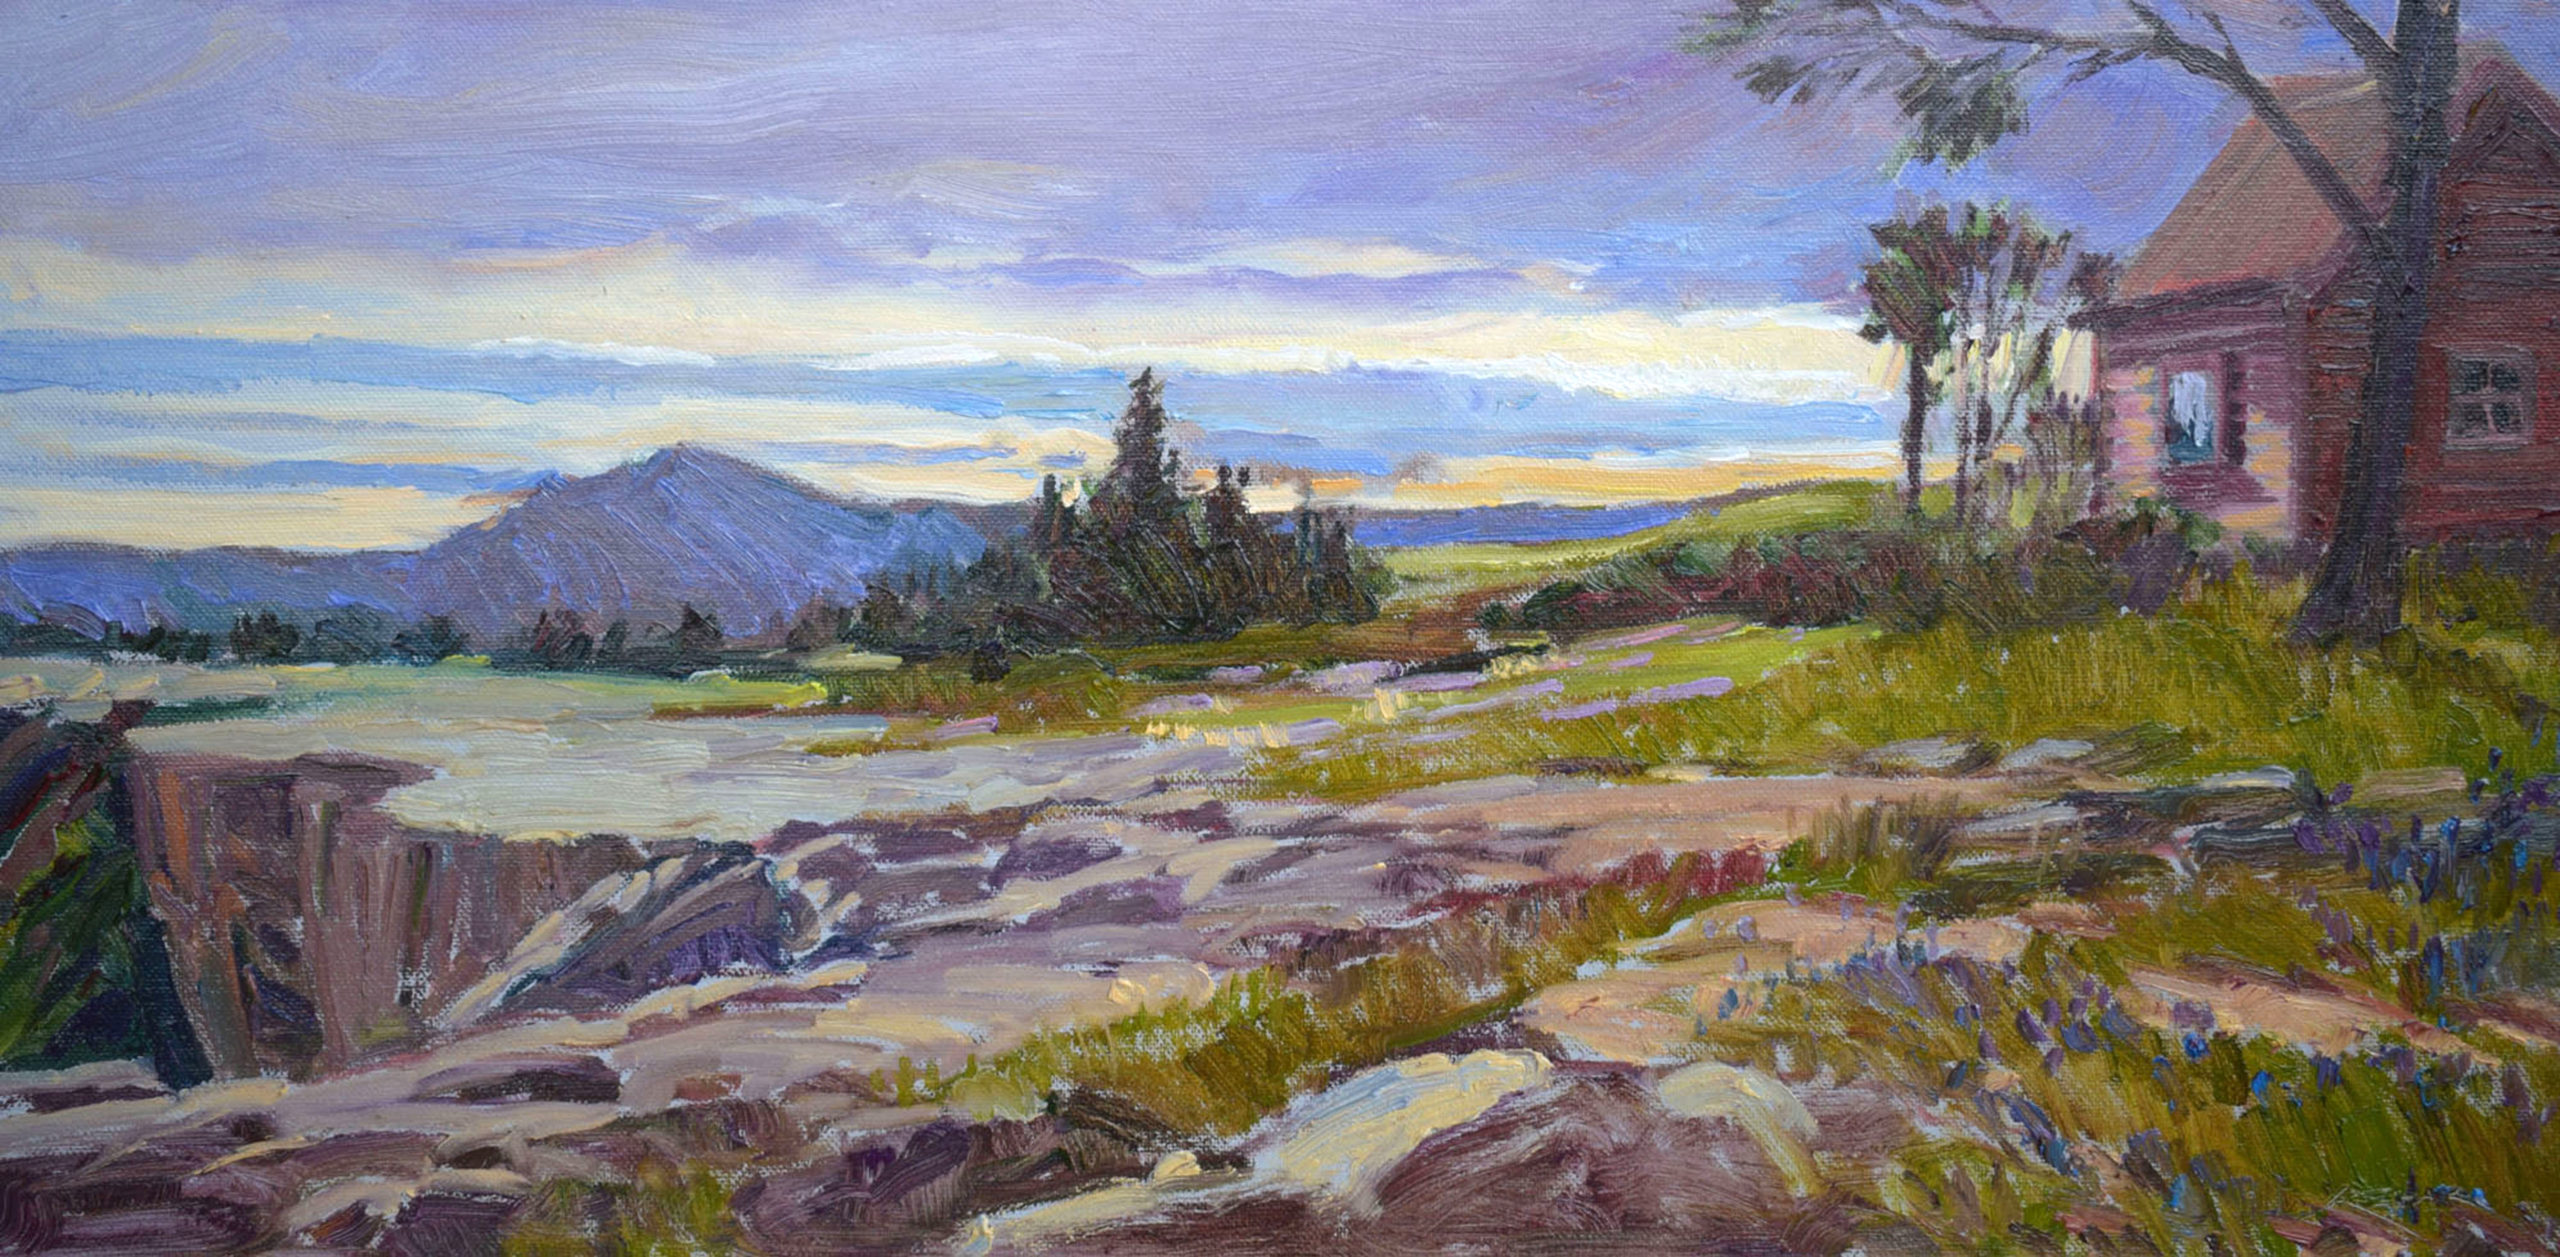 Landscape painting - 1. Jim Rehak, "Room With a View," 2020, oil, 16 x 20 in., Private collection, Plein air